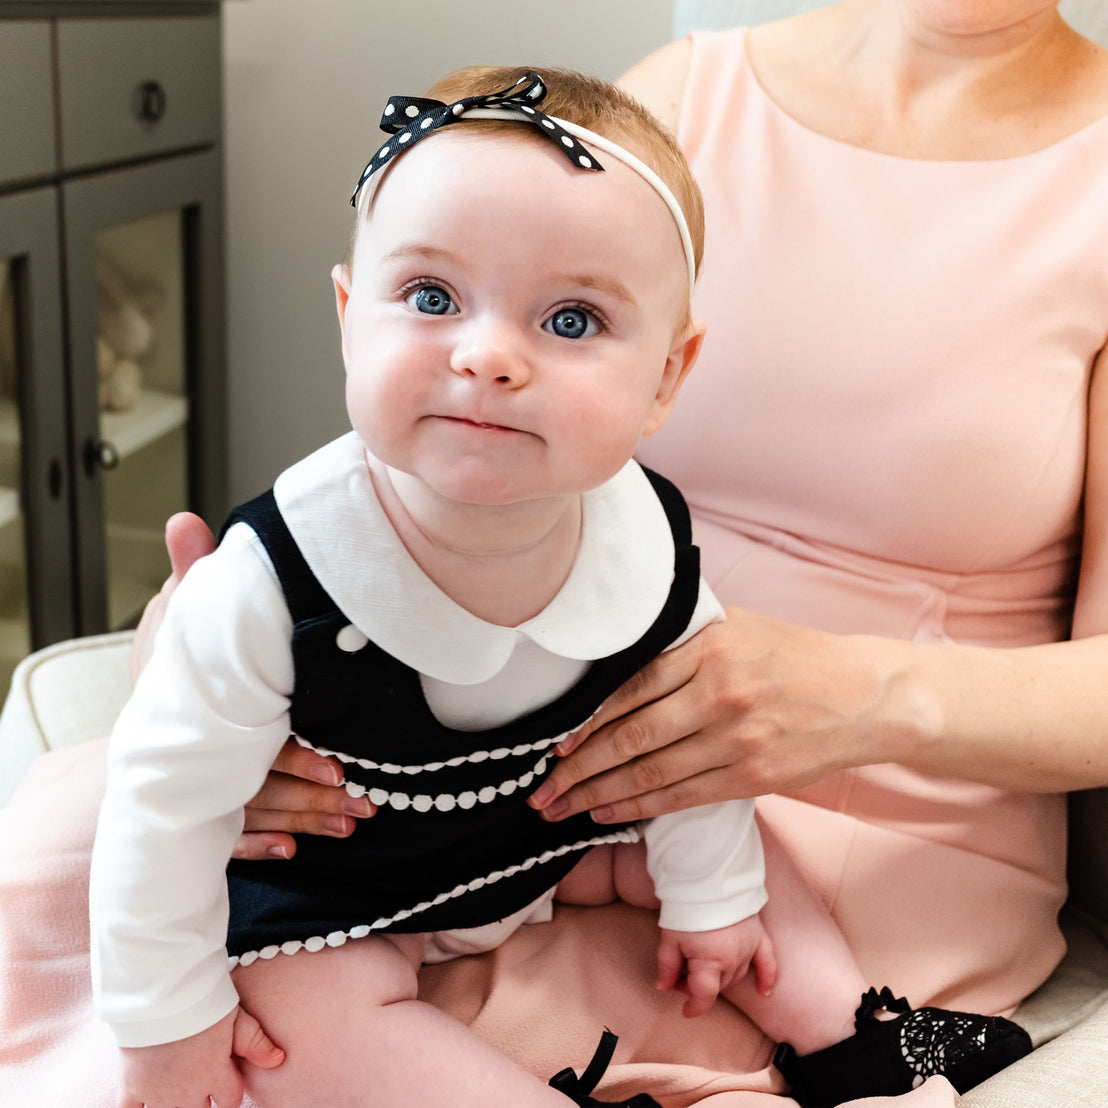 A baby with blue eyes and wearing a headband and black floral lace dress looks directly at the camera, held by a woman in a pink blouse, partially visible.